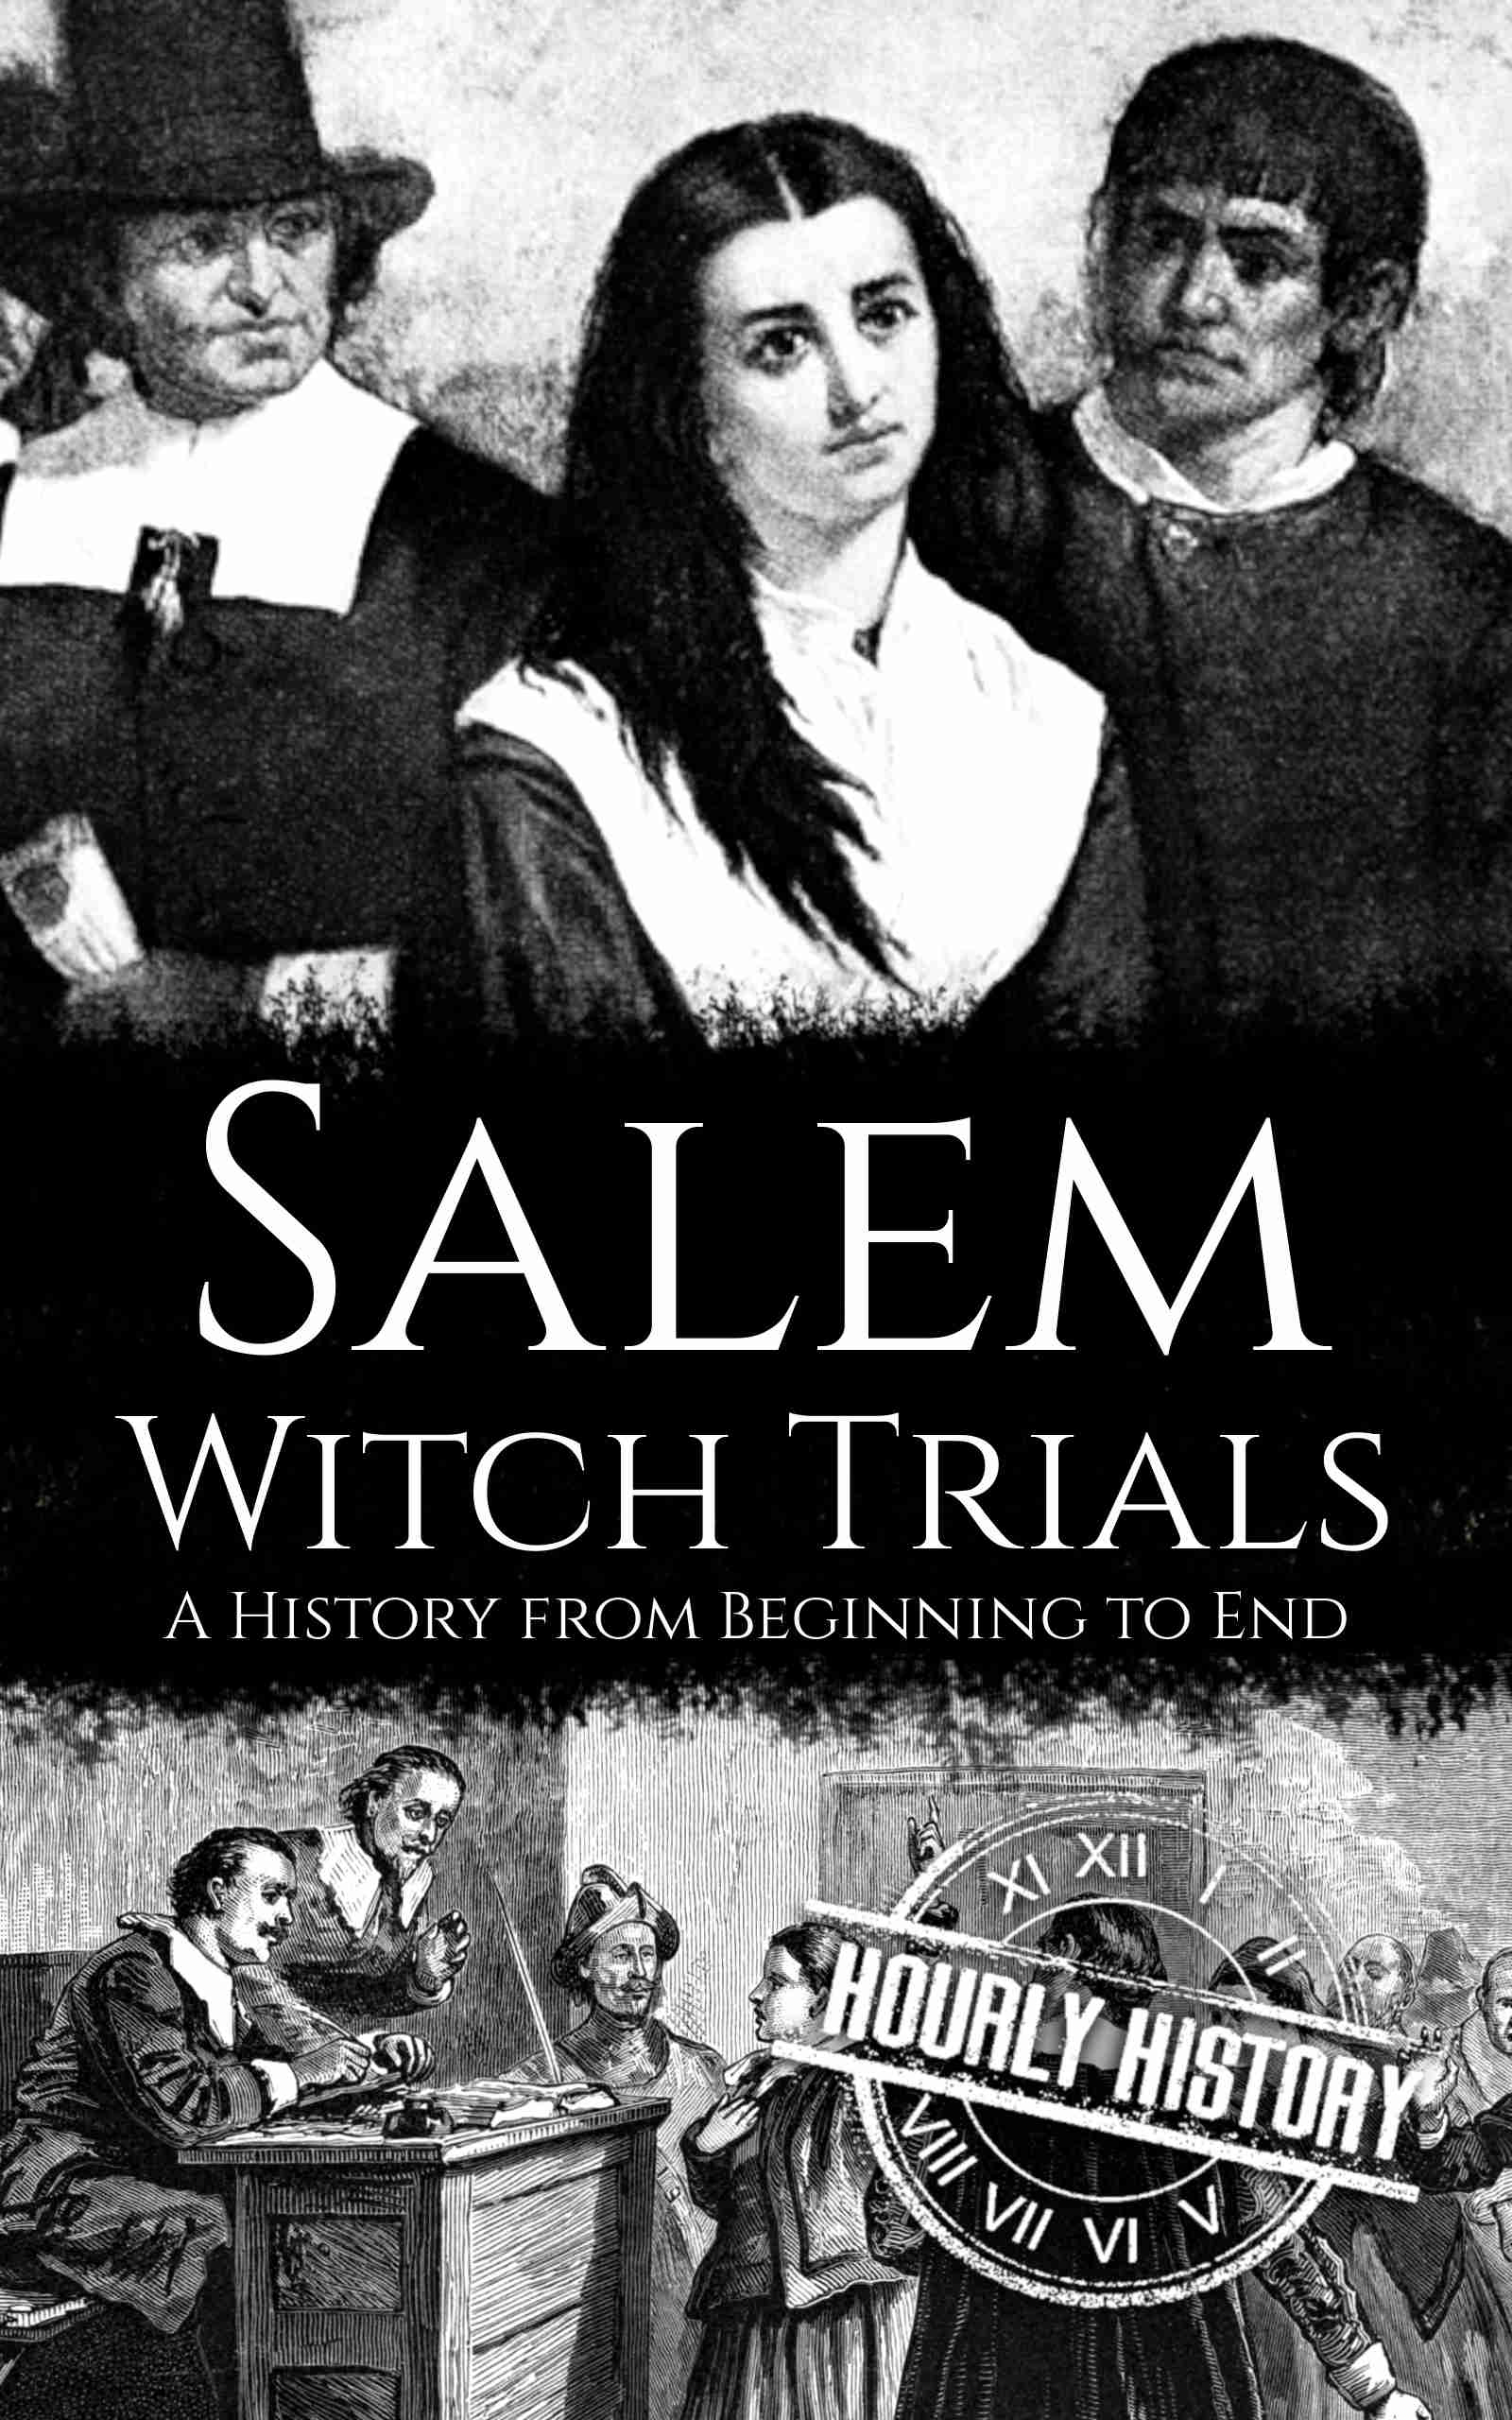 research paper topics on salem witch trials